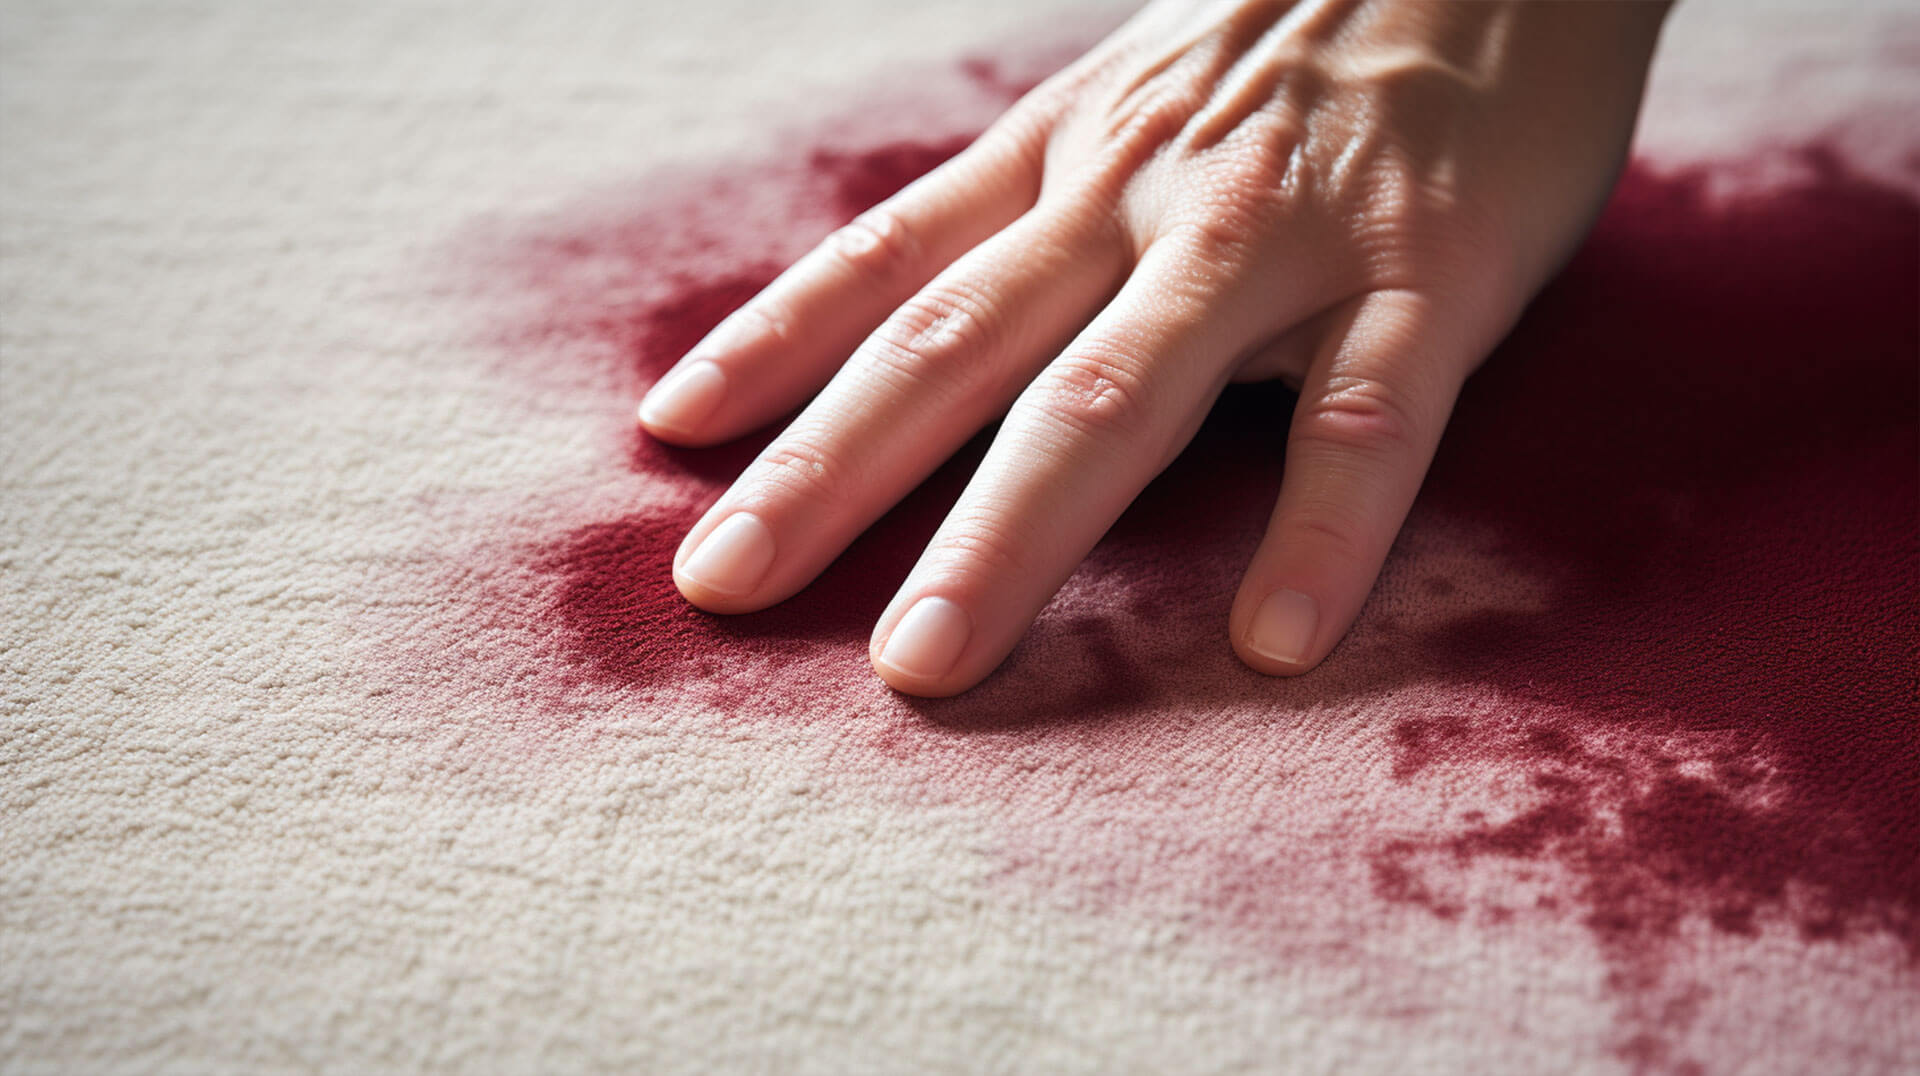 gloved hands gently blotting a deep red wine stain from a cream-colored carpet